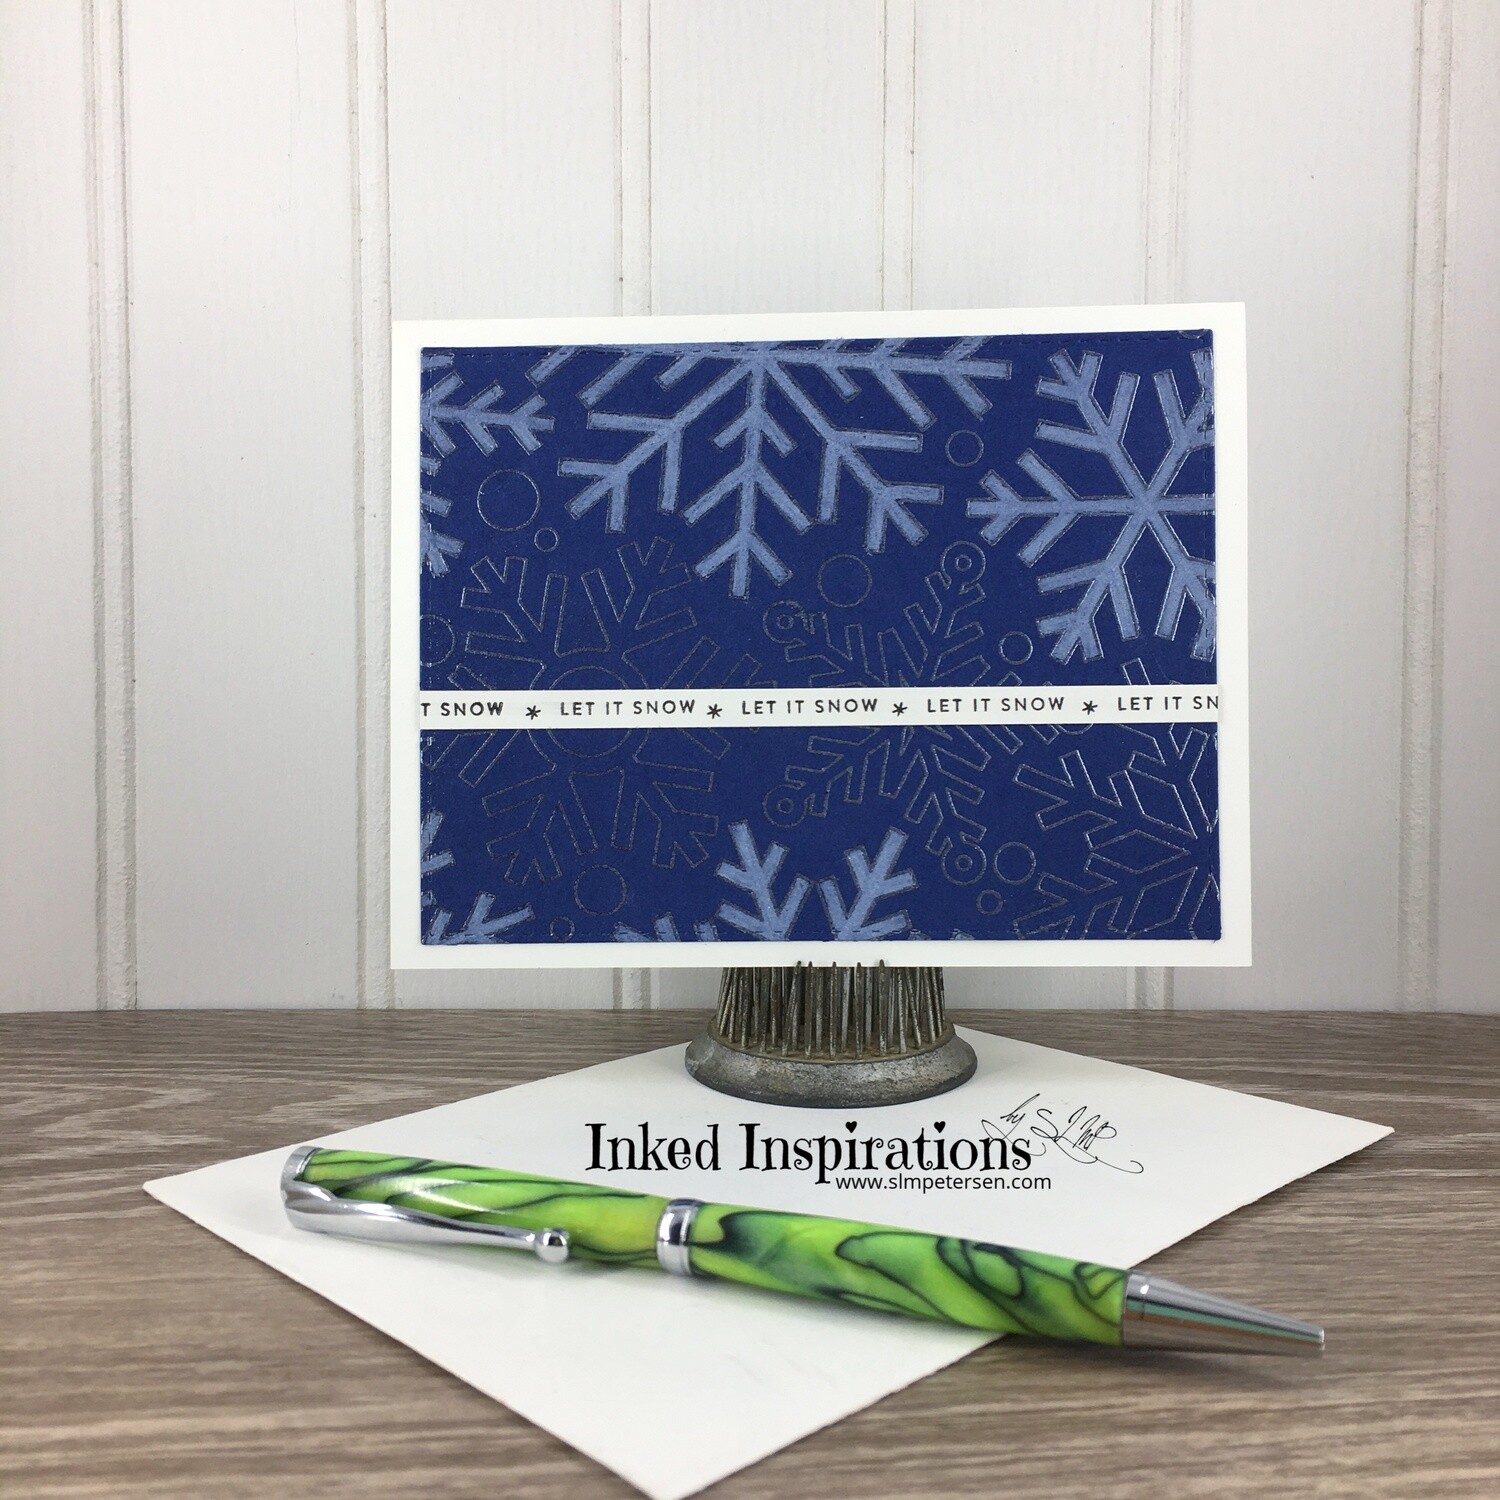 Let it Snow - Large Blue & Silver Snowflakes Gift Card Holder